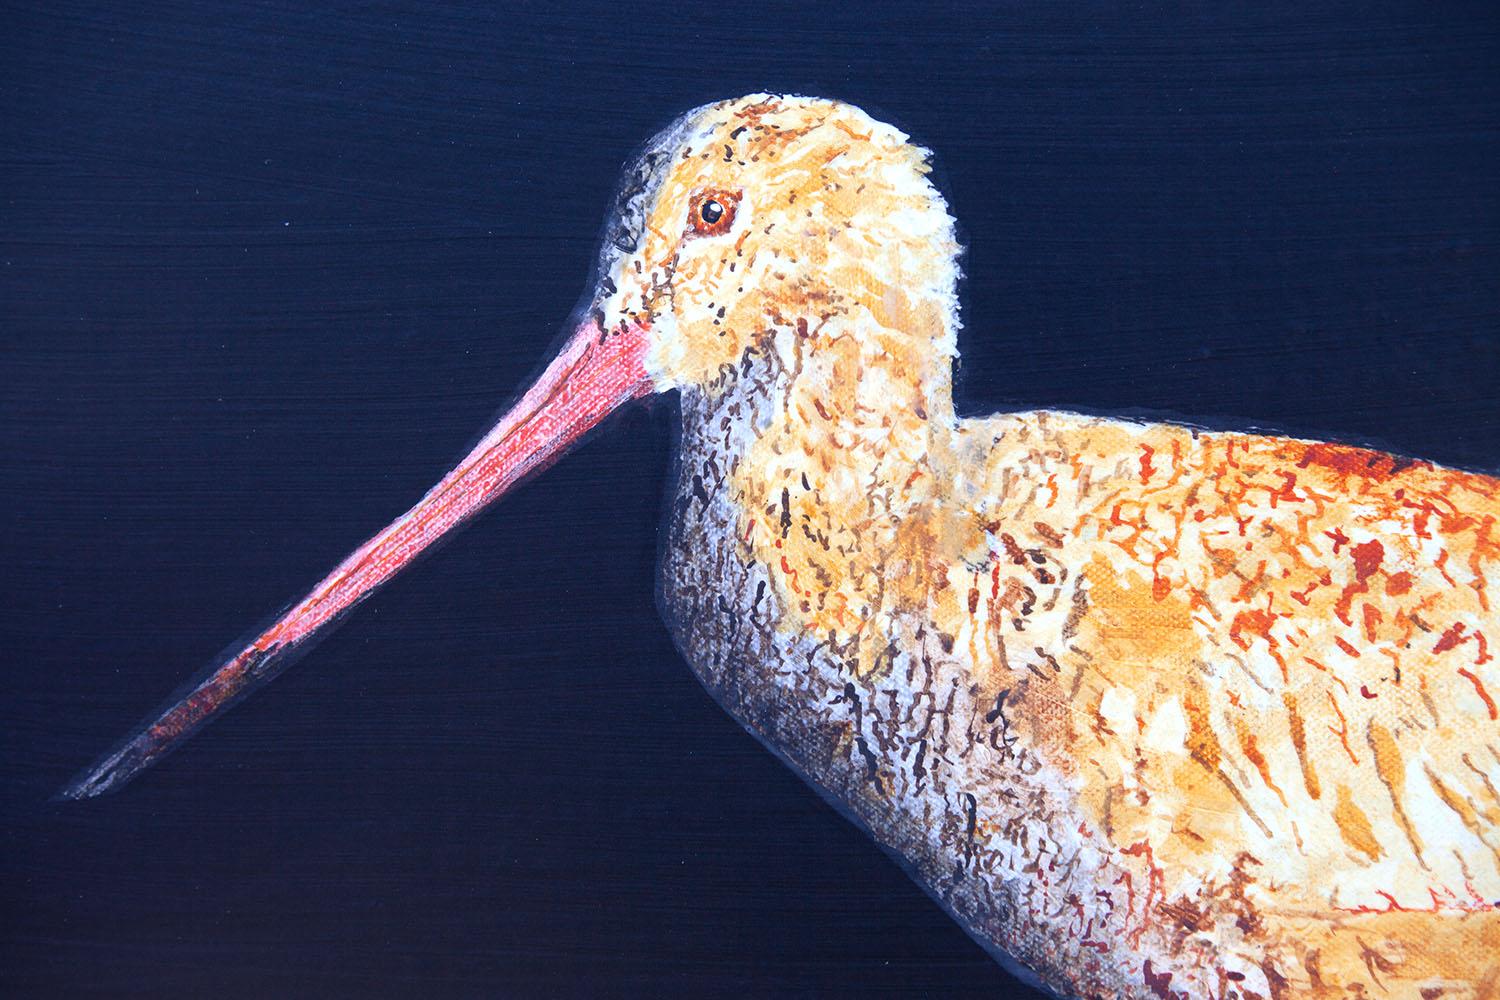 Two Godwits at Night, Original Painting - Black Animal Painting by Emil Morhardt